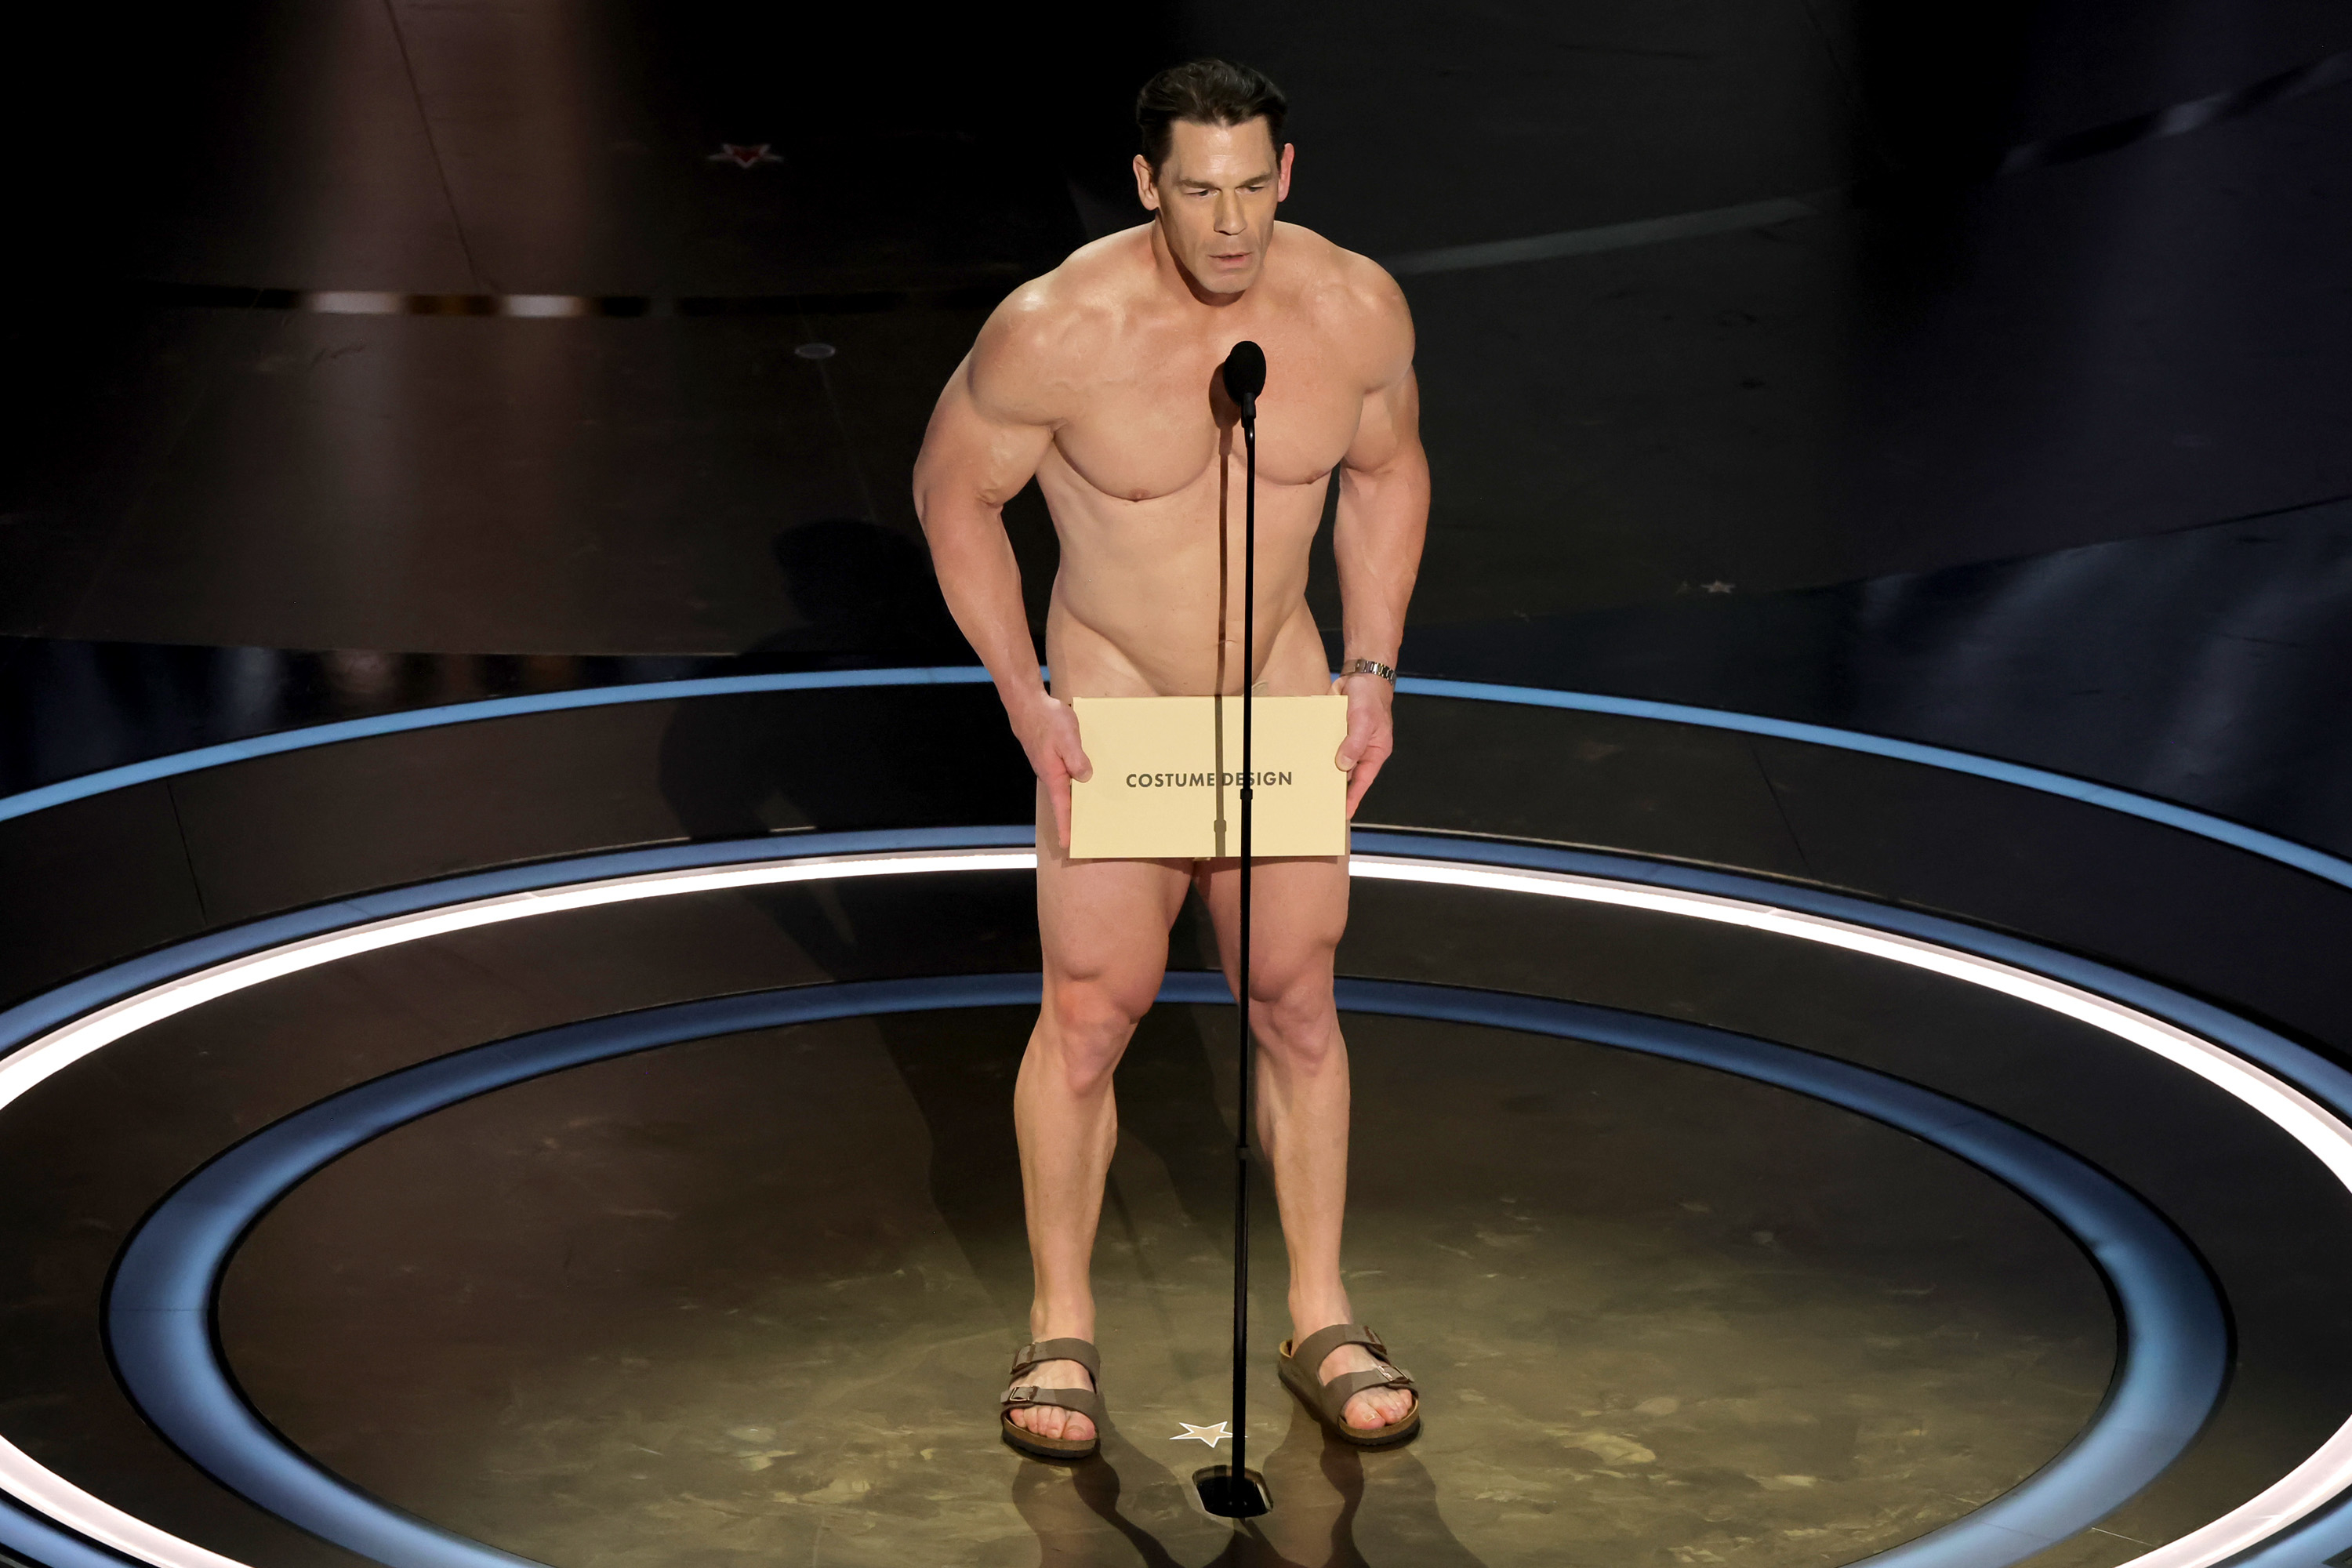 John Cena stands shirtless at a microphone on a stage with a modesty cover